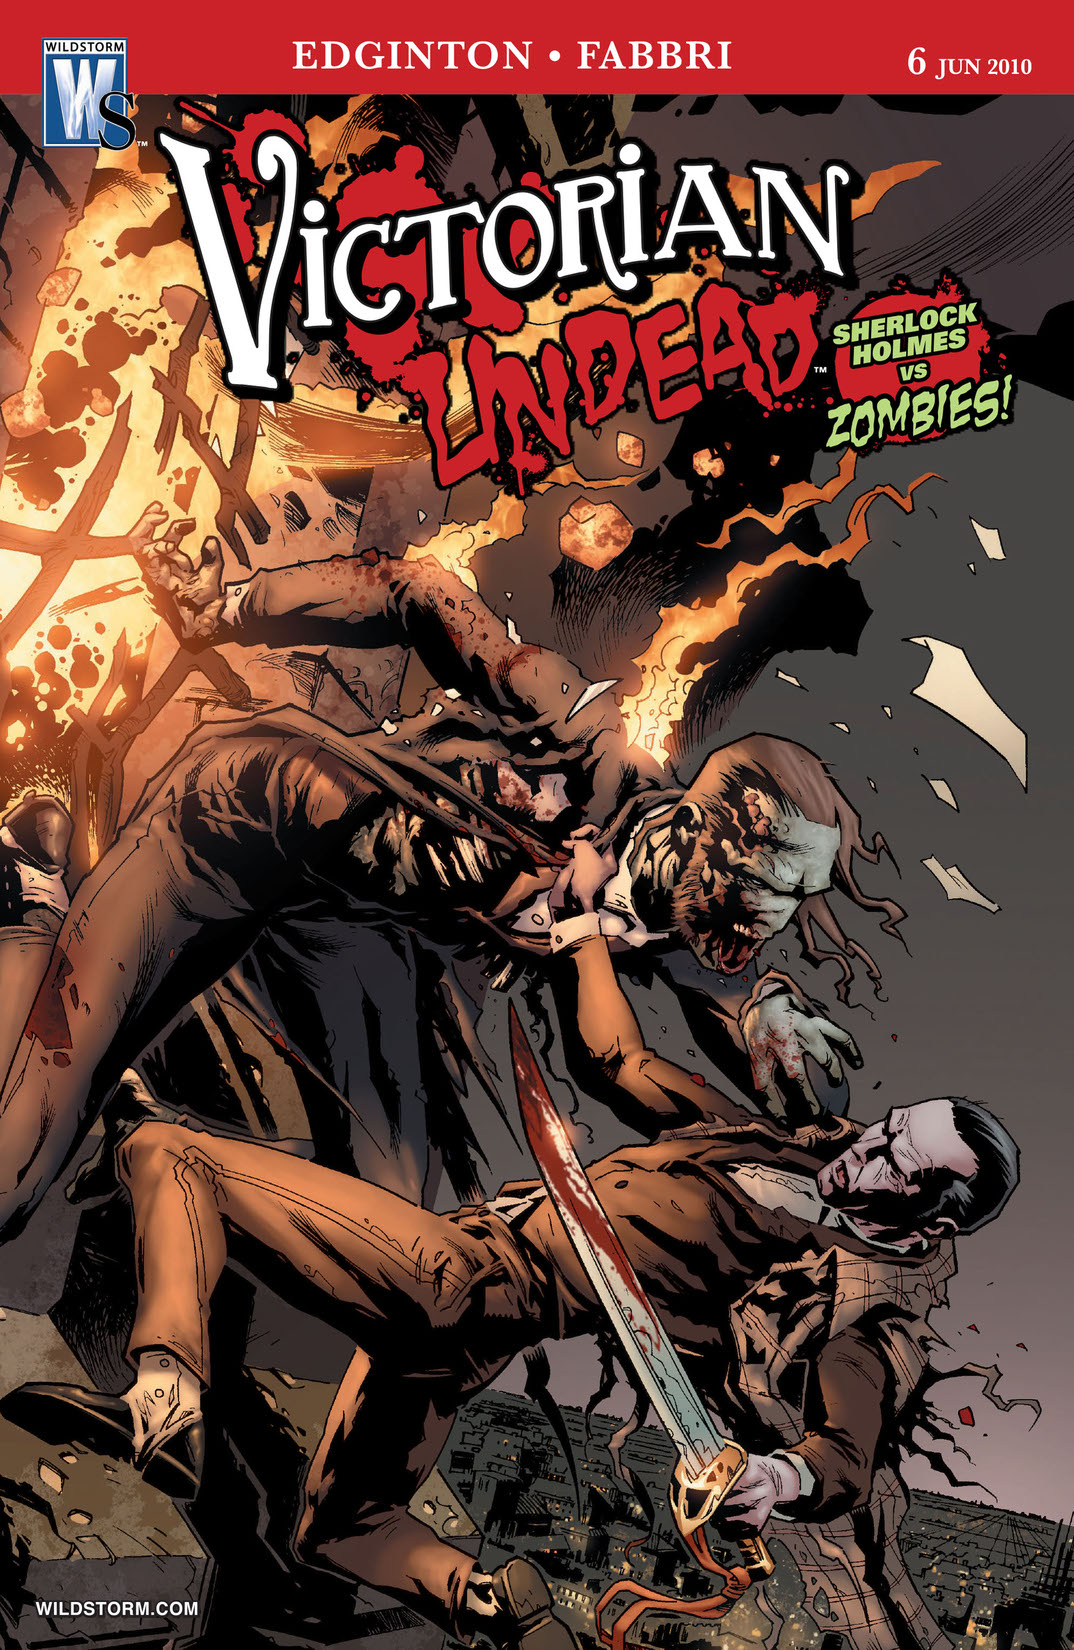 Victorian Undead #6 preview images